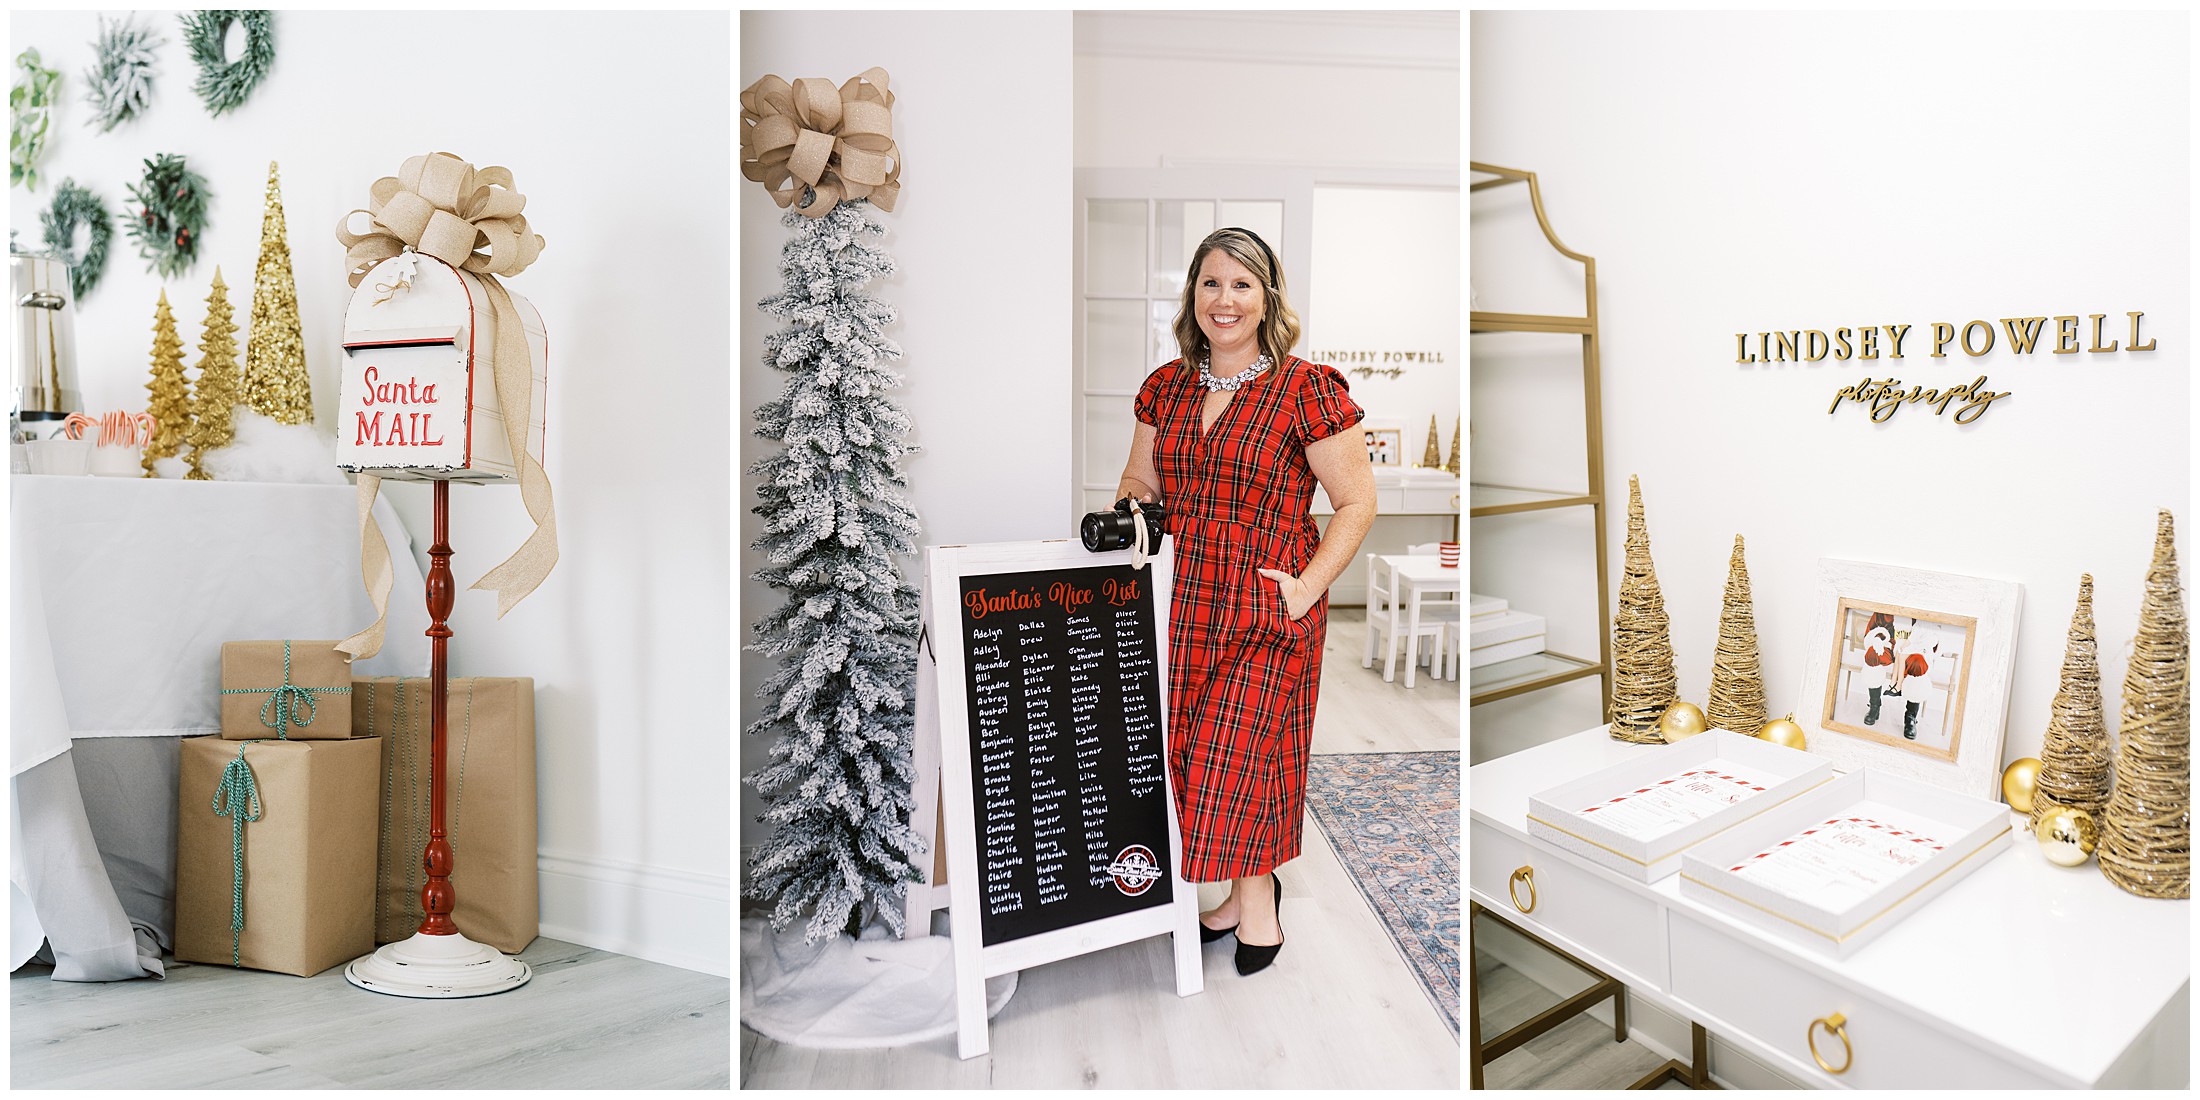 Three photos show photographer Lindsey Powell in her photography studio that is decorated for Marietta Santa Photos.